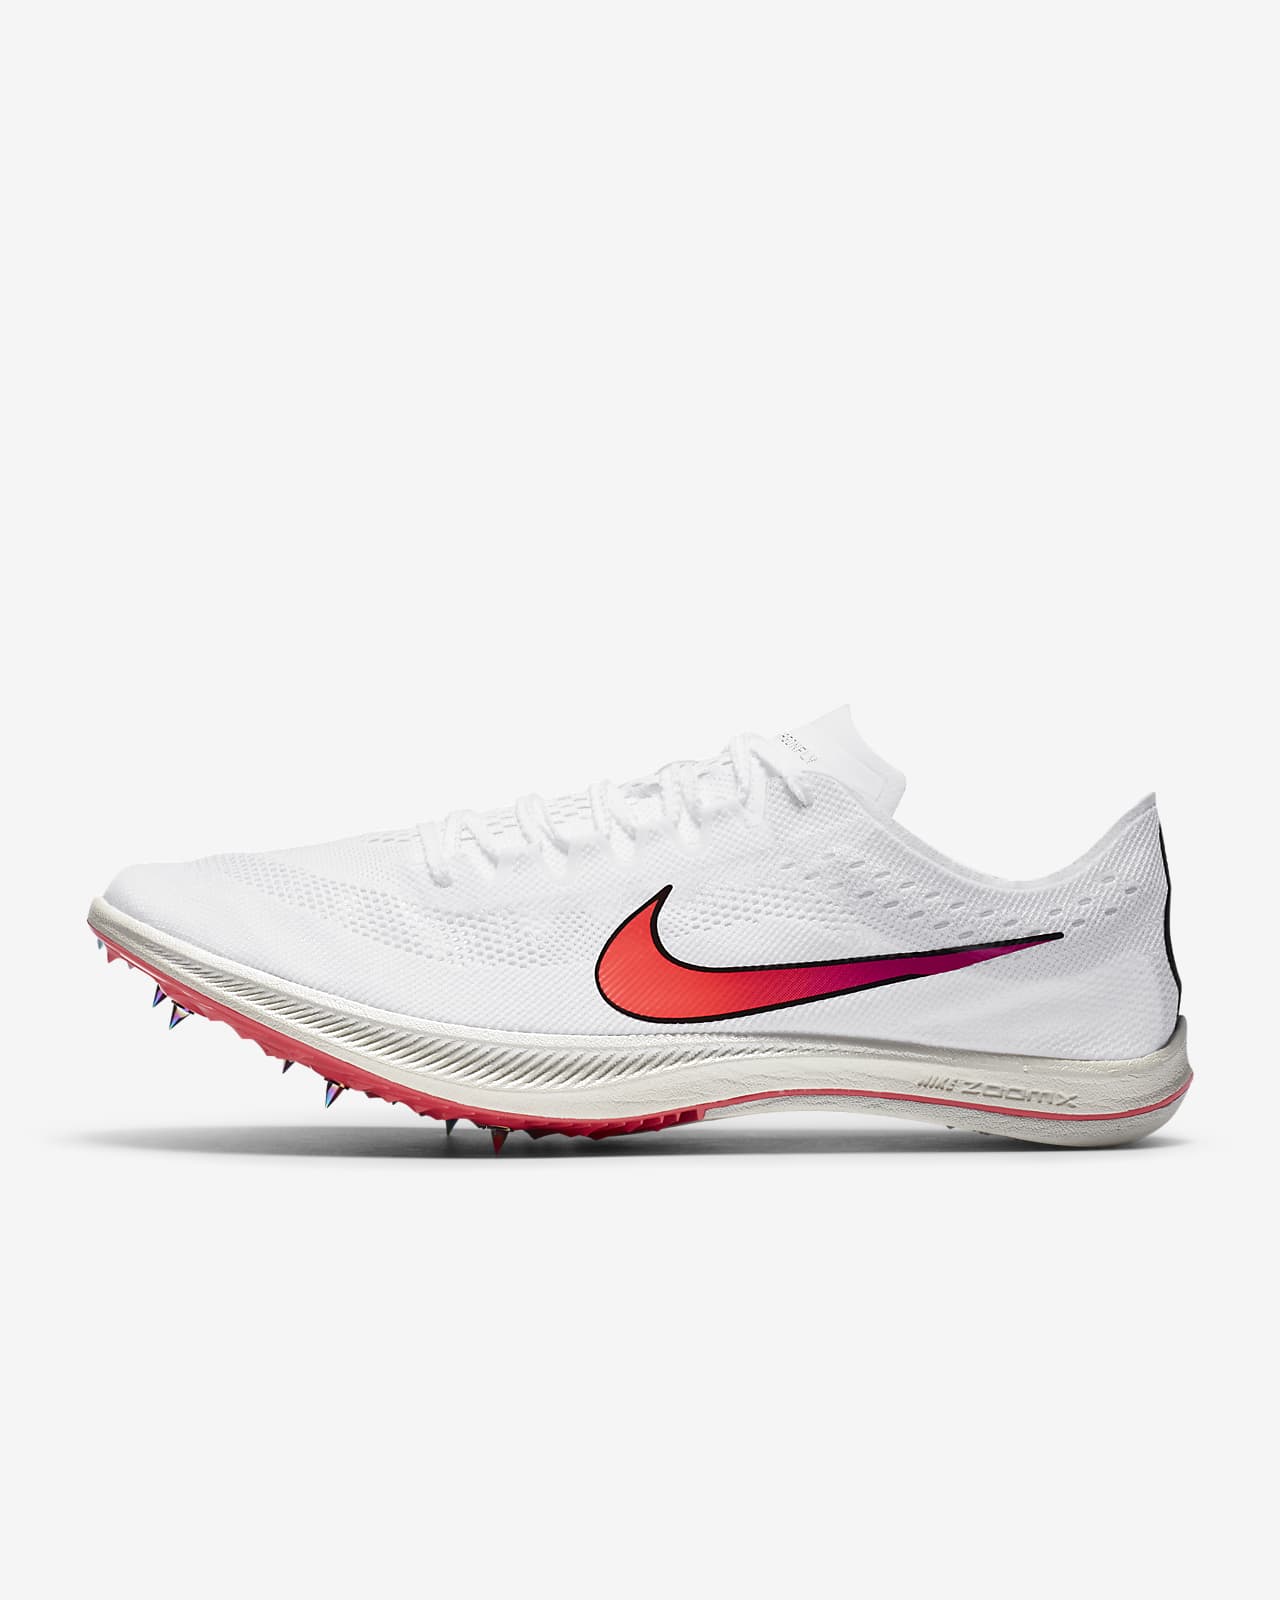 air zoom vaporfly spikes